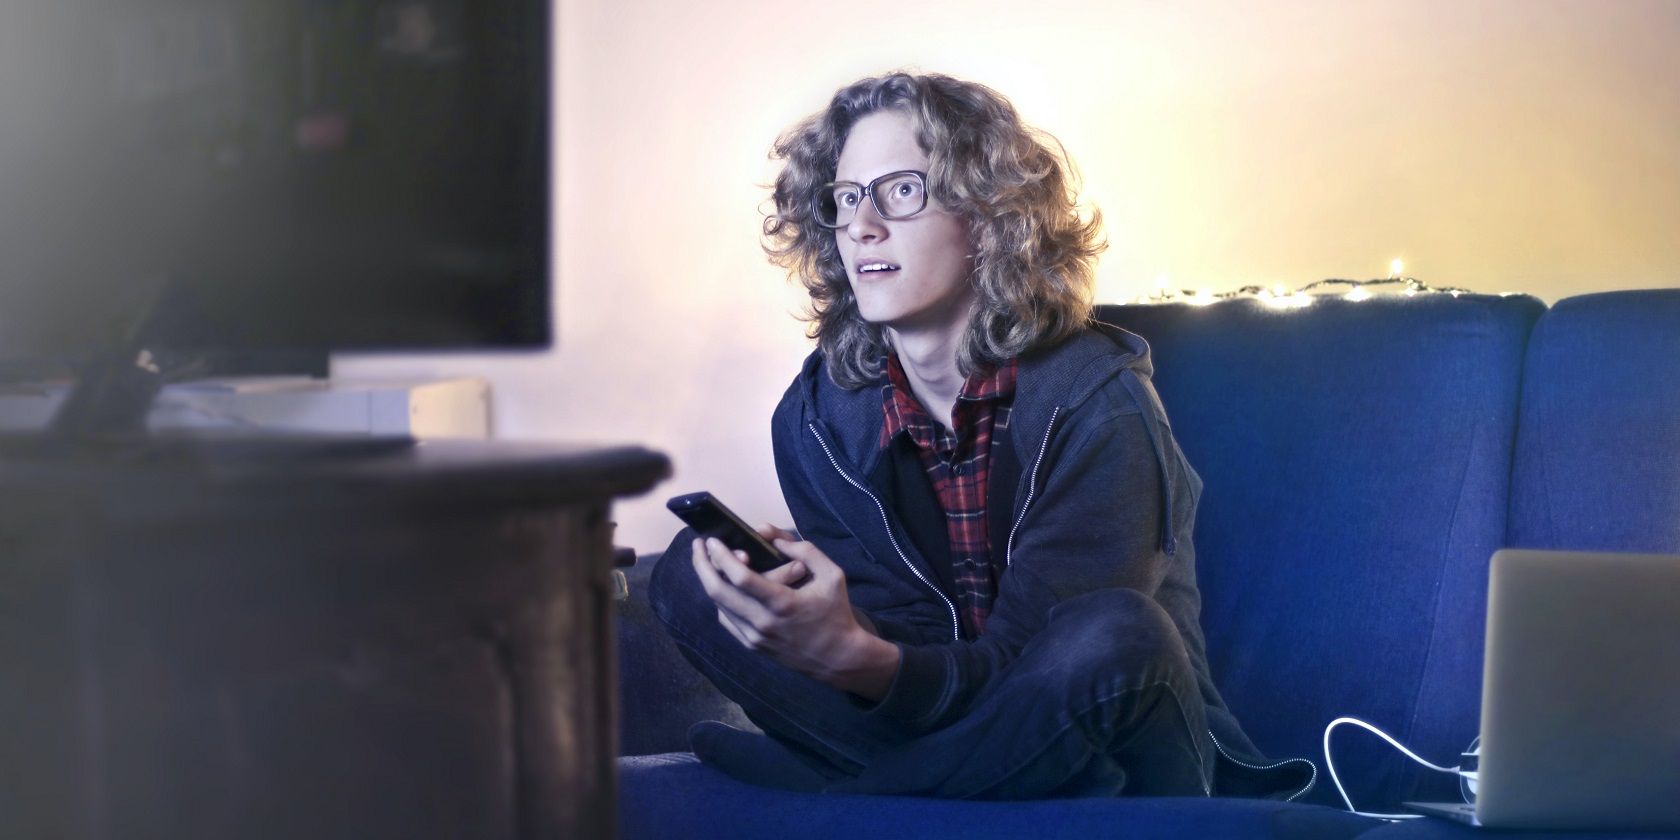 person watching tv with phone and laptop there